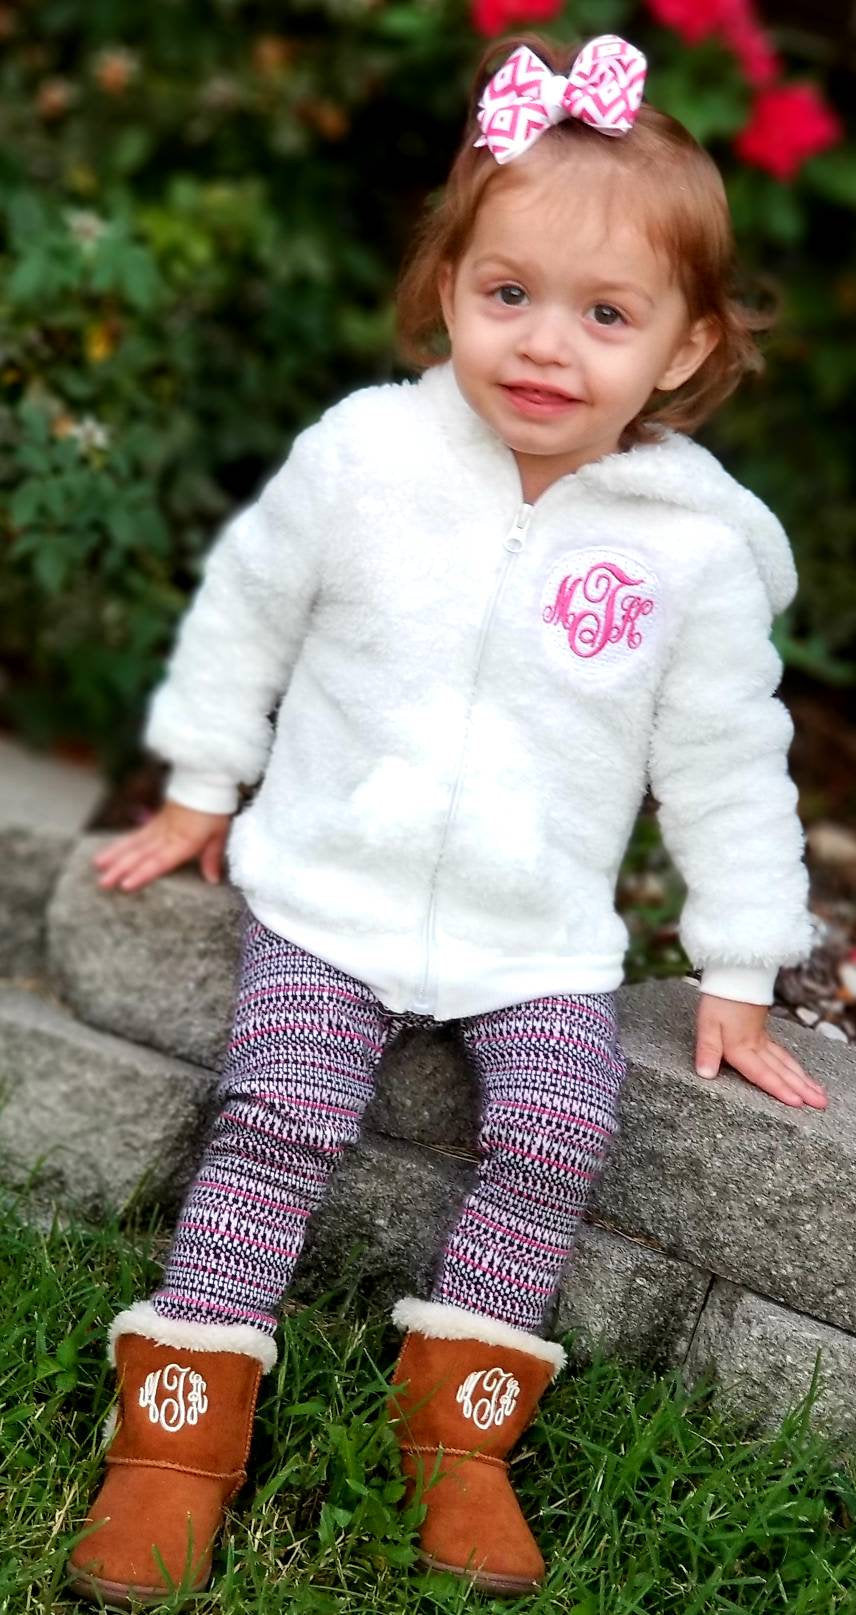 Floral Monogram Custom Embroidered Baby/toddler Sweater 